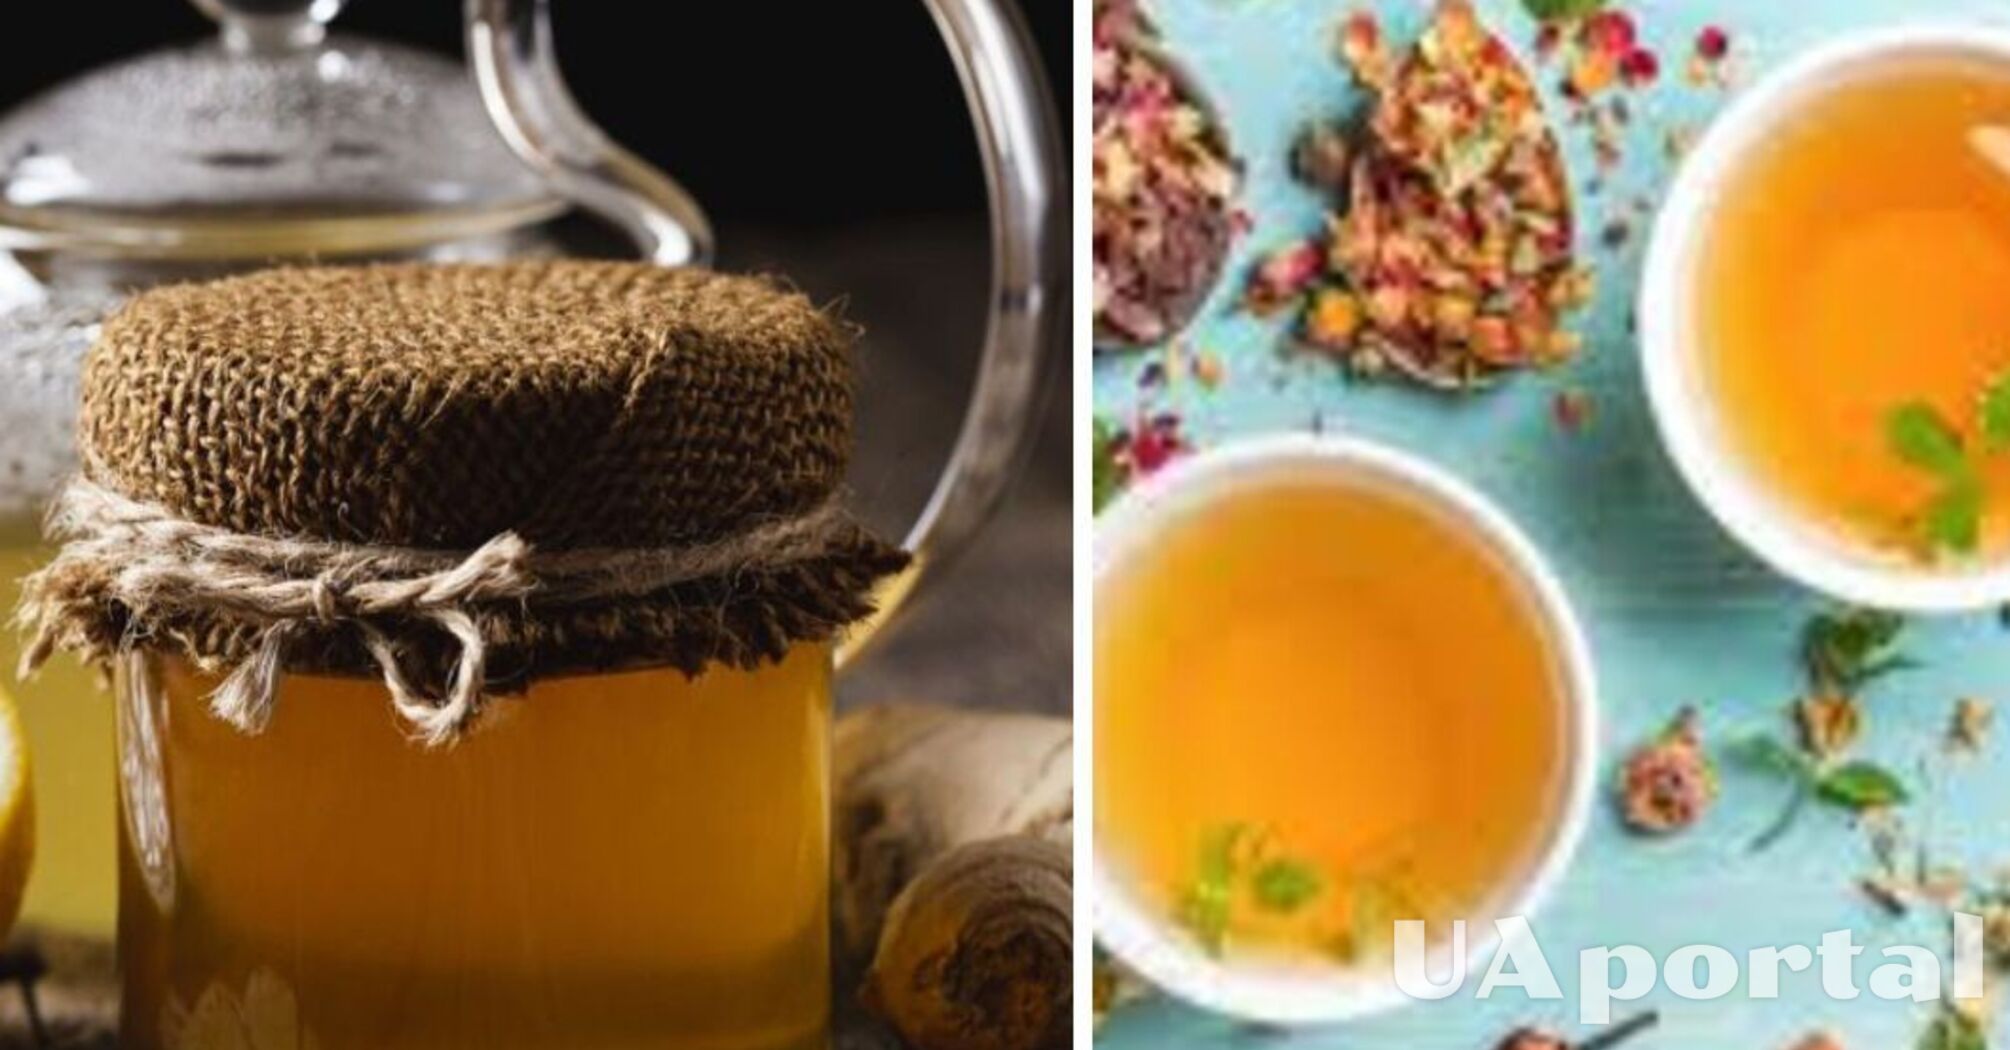 Protects against many diseases: why you should regularly drink tea with cardamom and cinnamon 